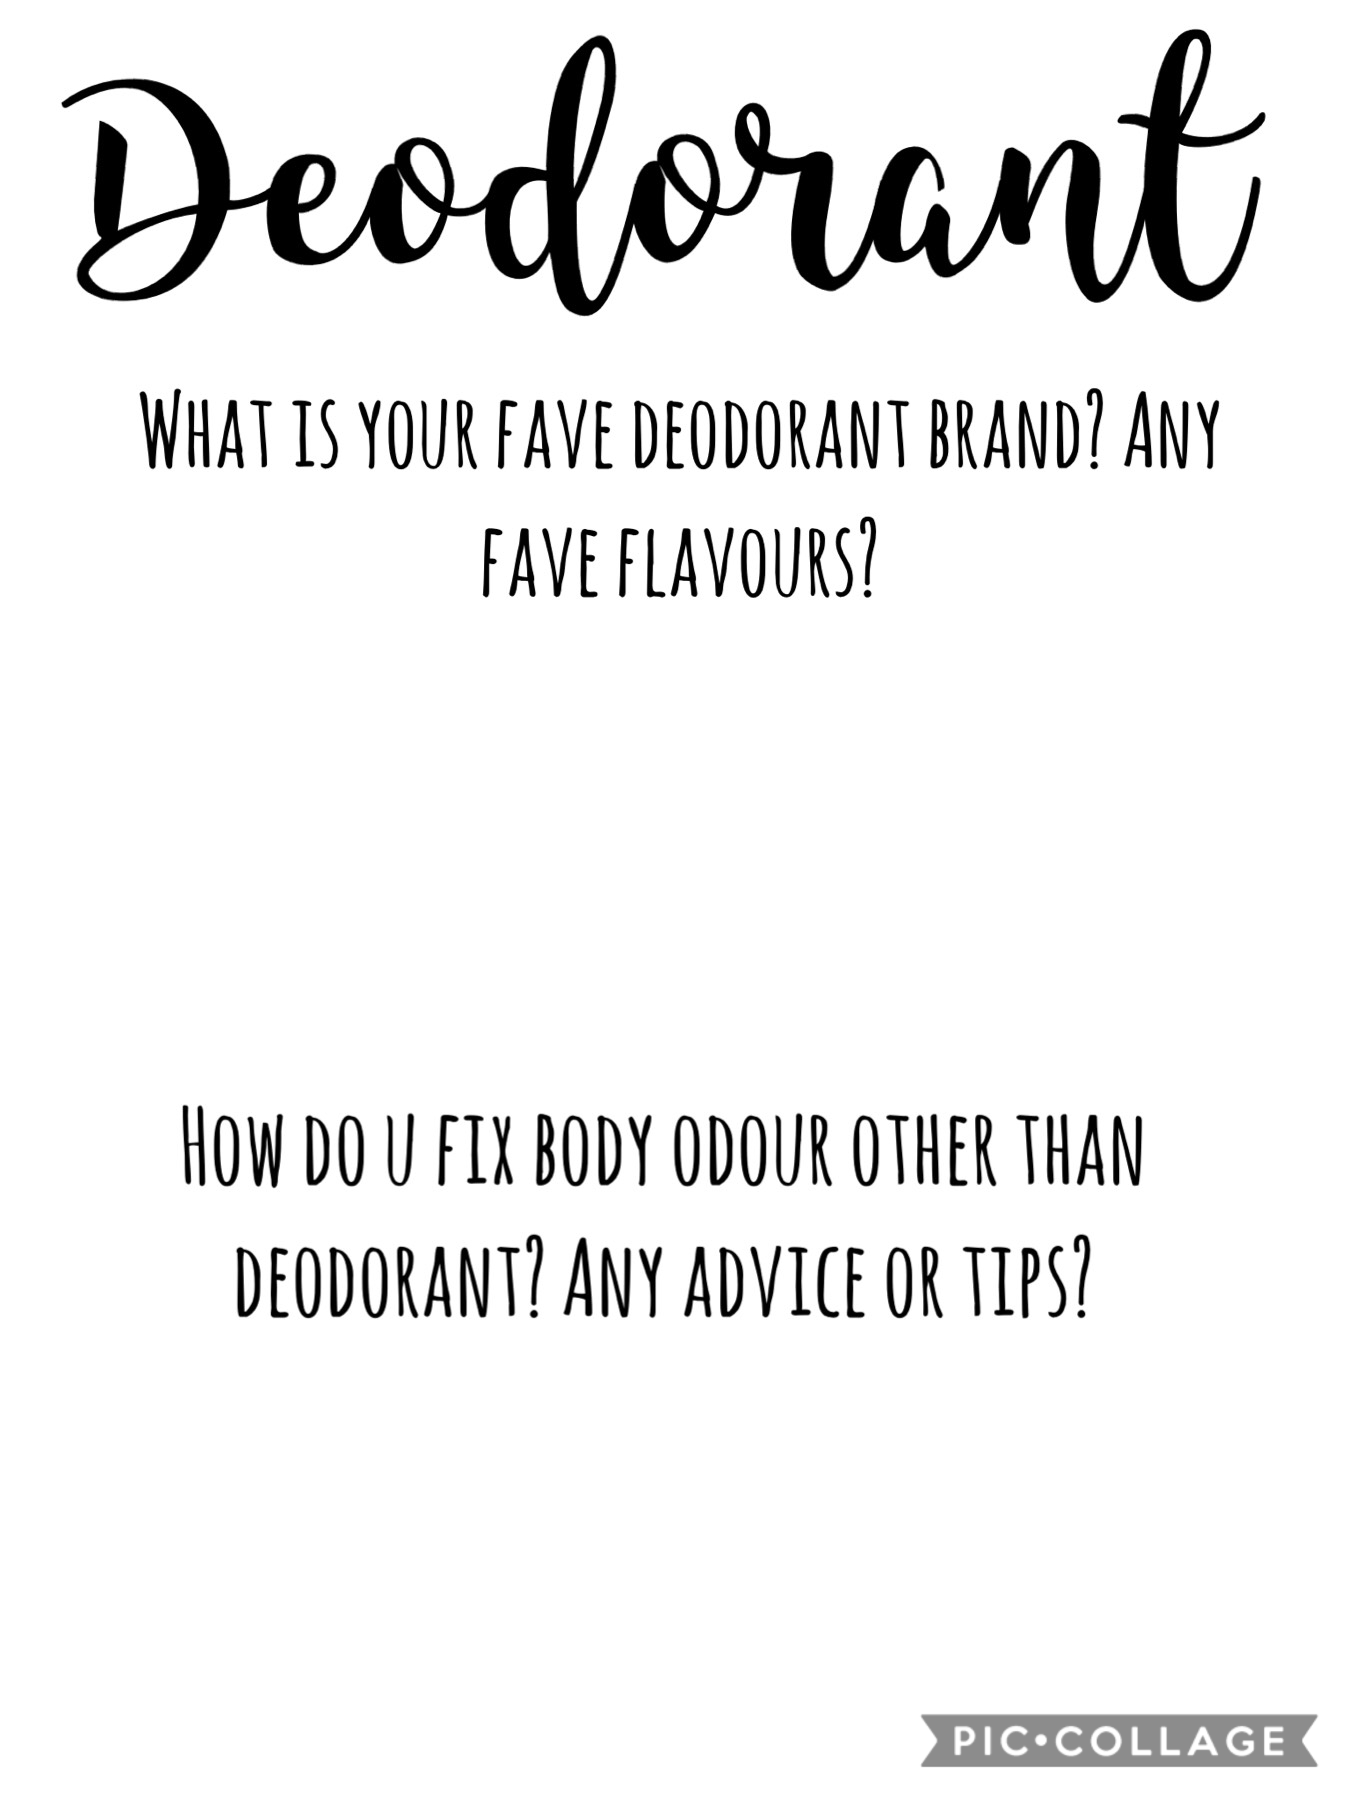 Deodorant questions! What else should I talk about?